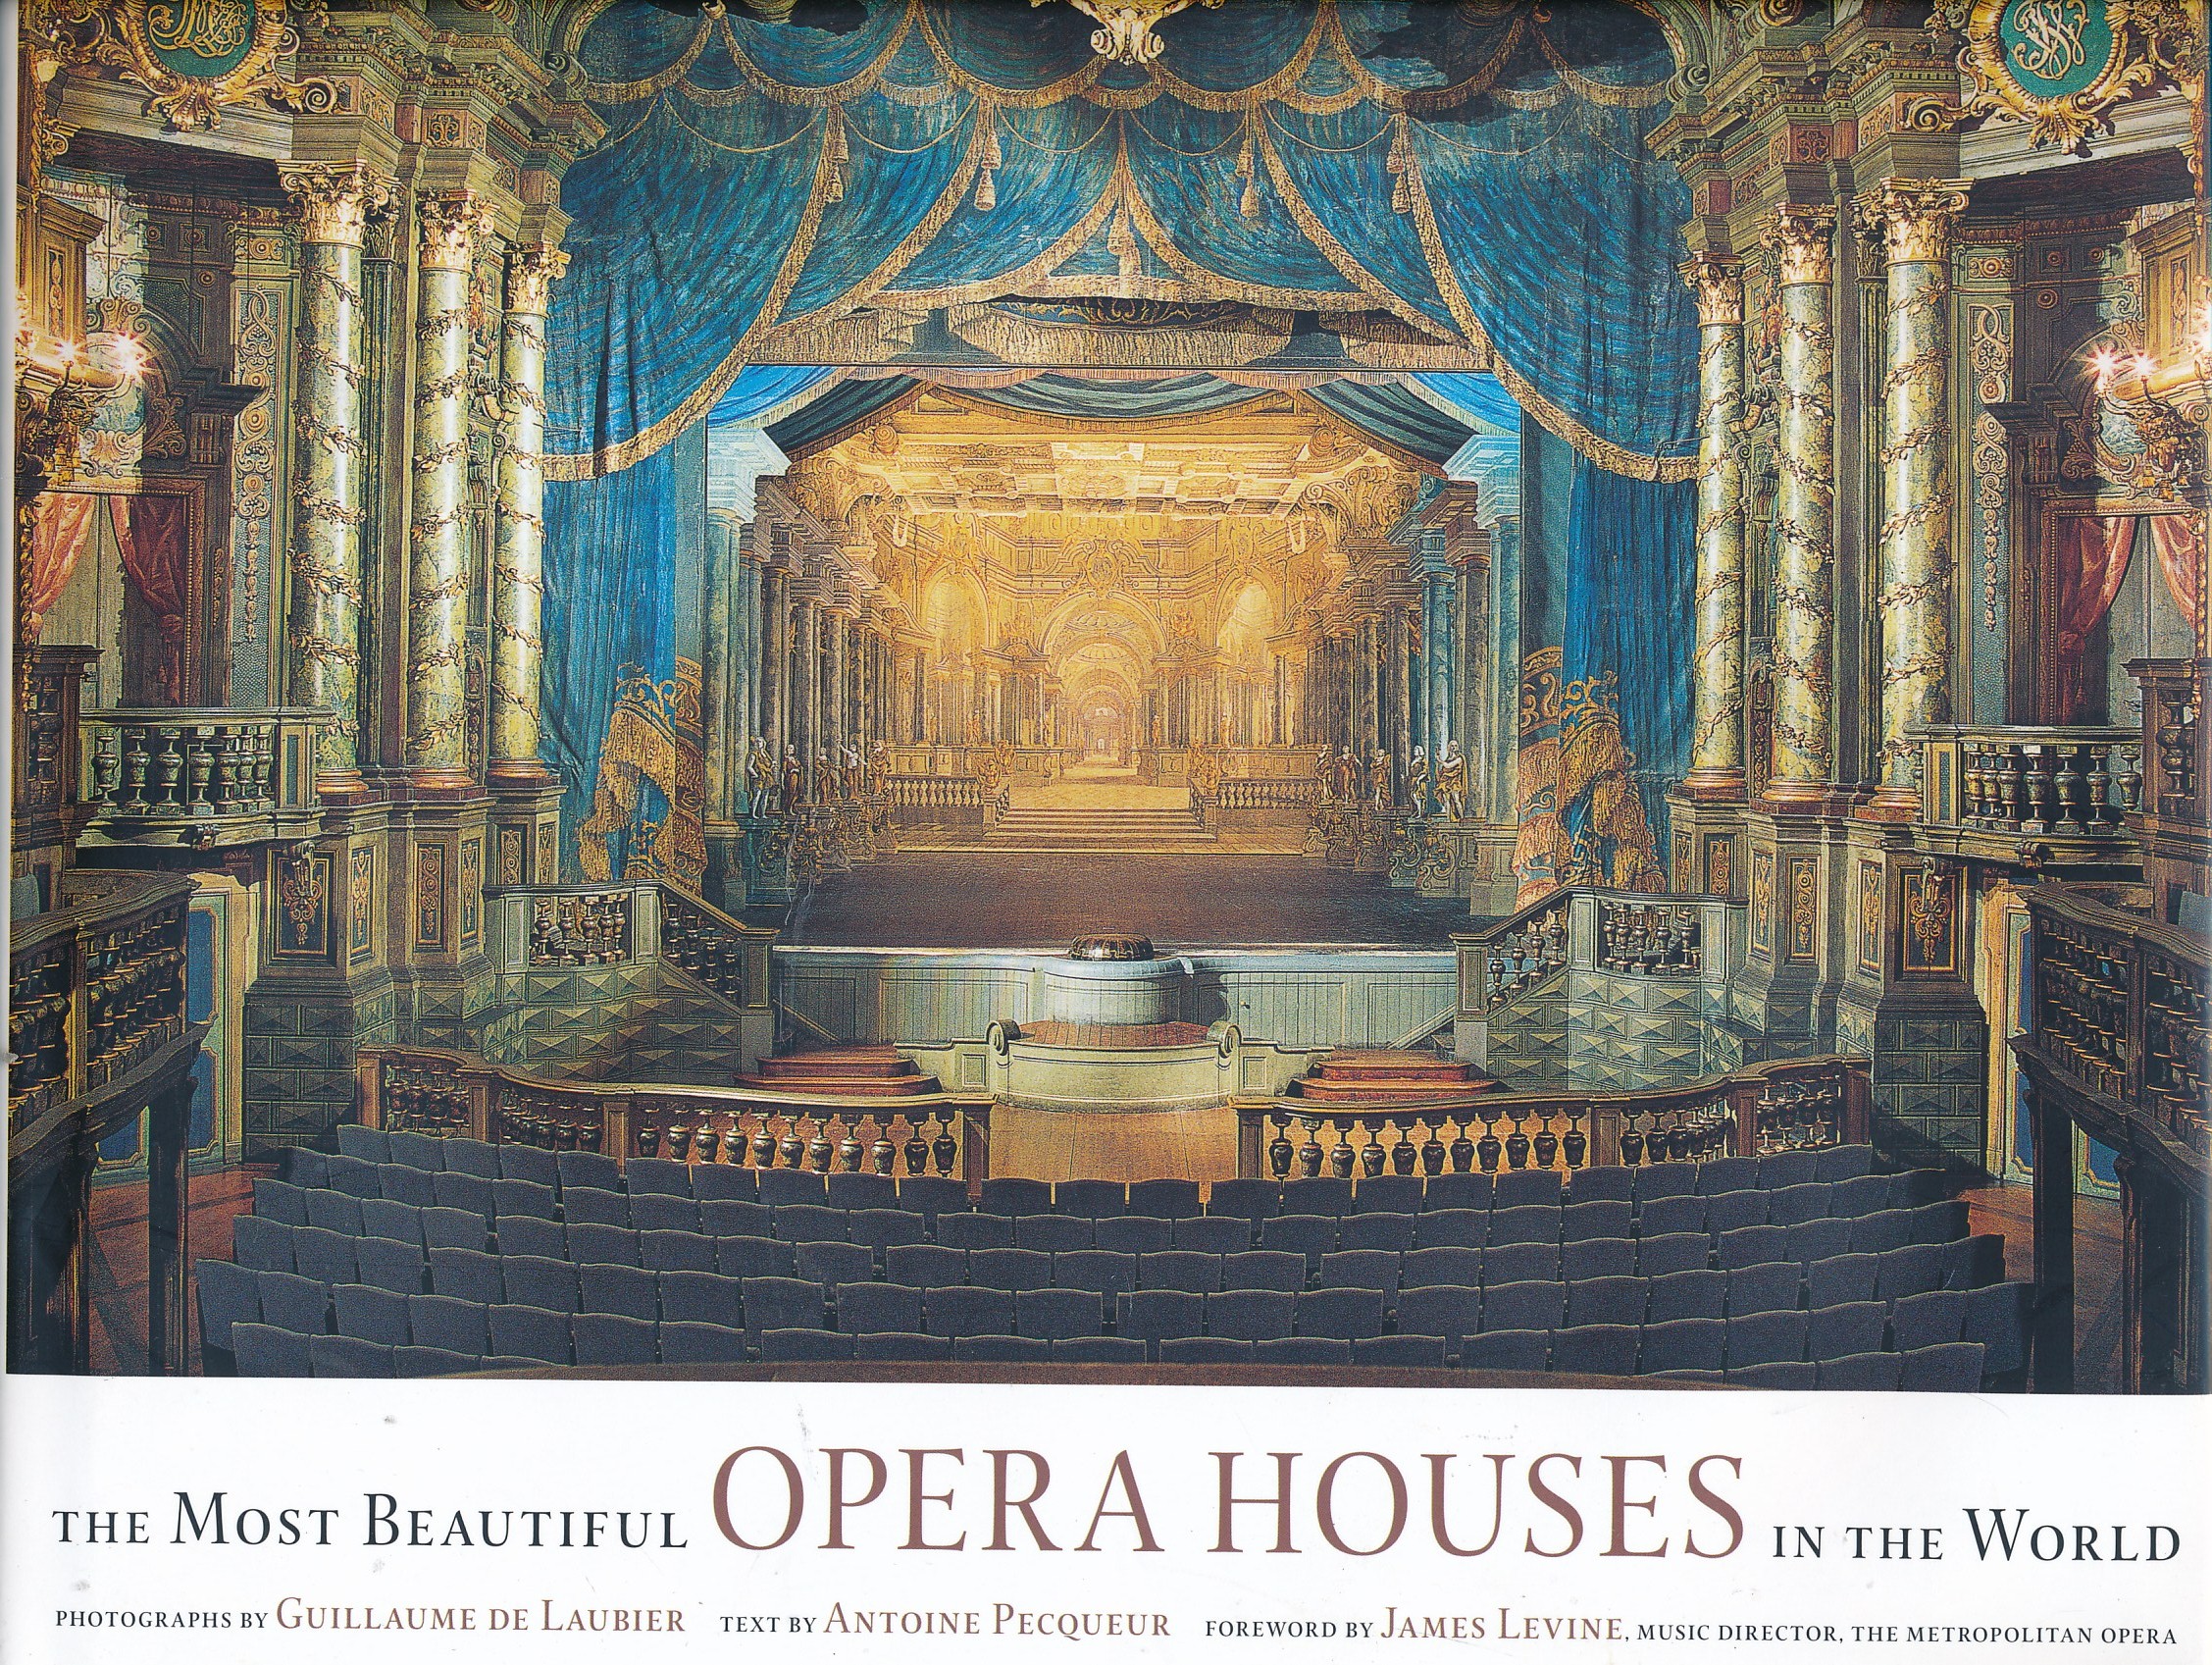 The Most Beautiful Opera Houses in the World